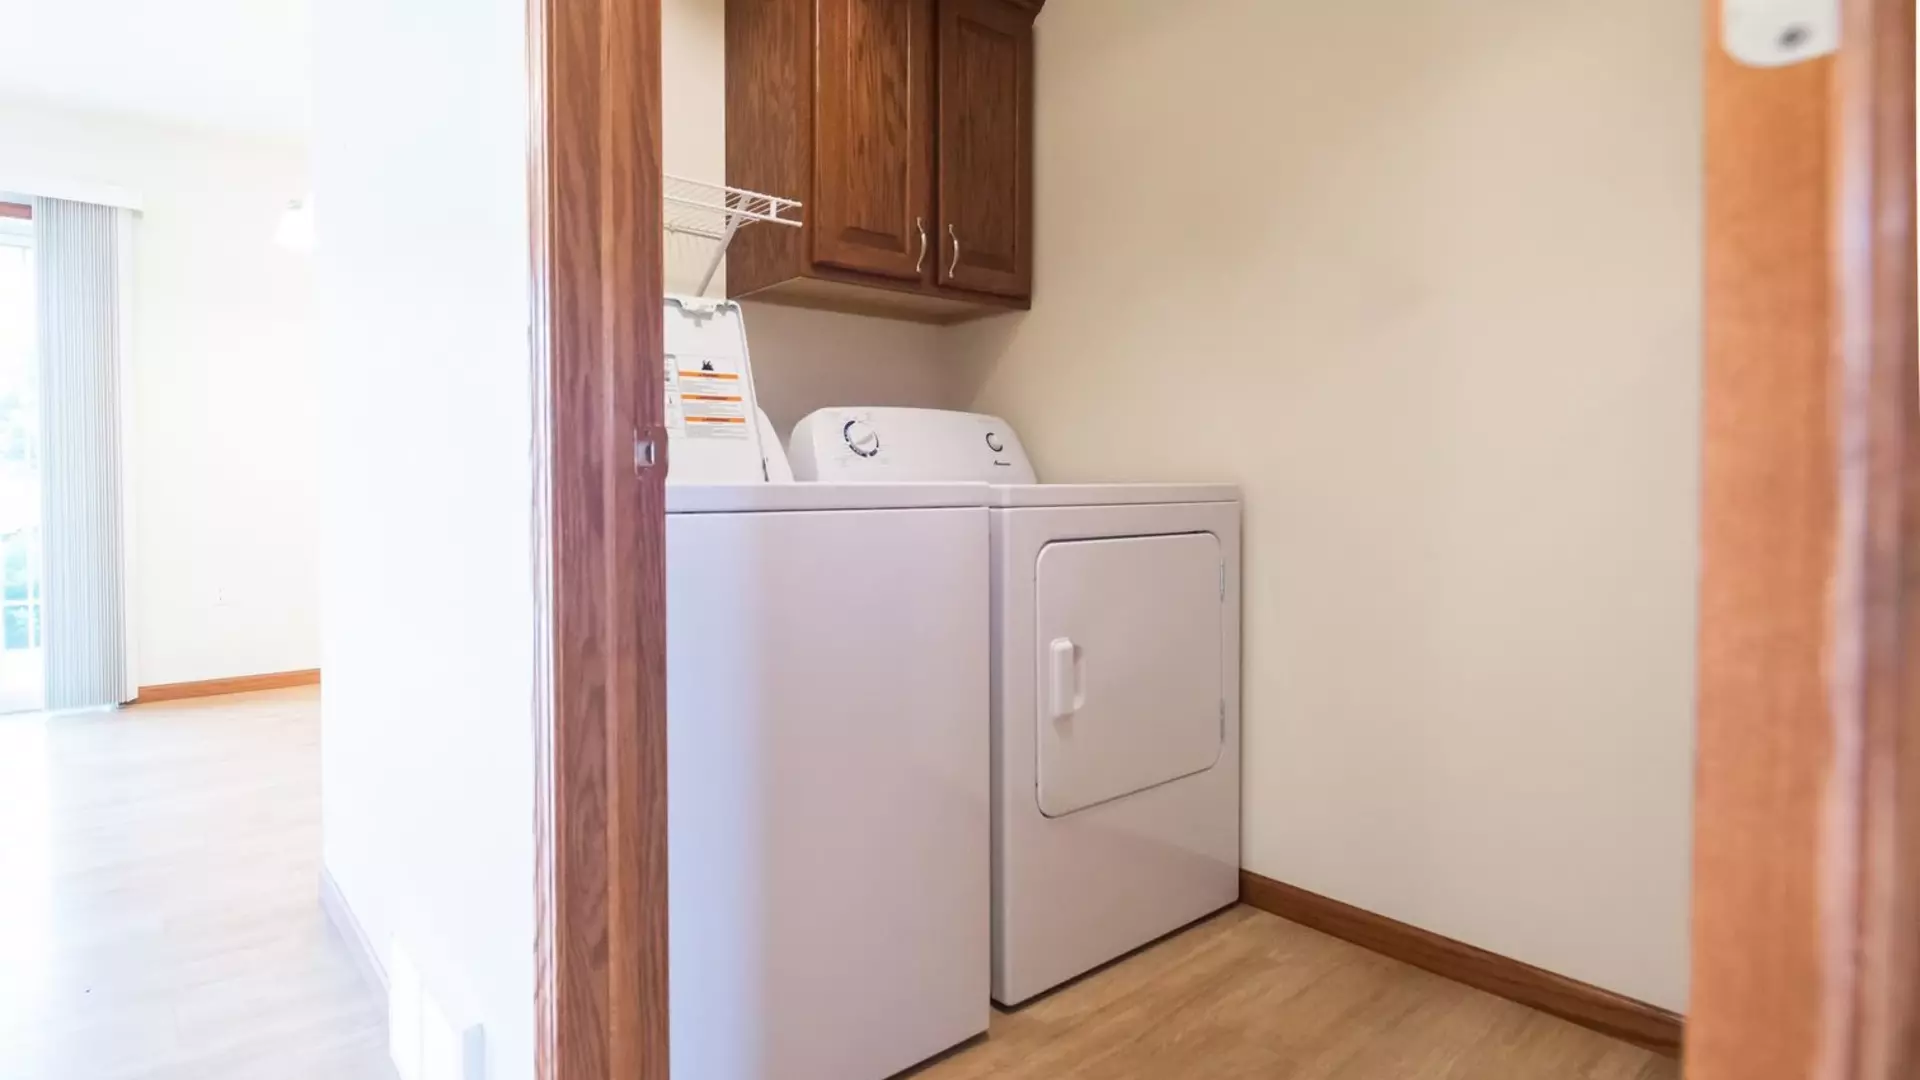 laundry-room-in-resident-and-fellow-housing